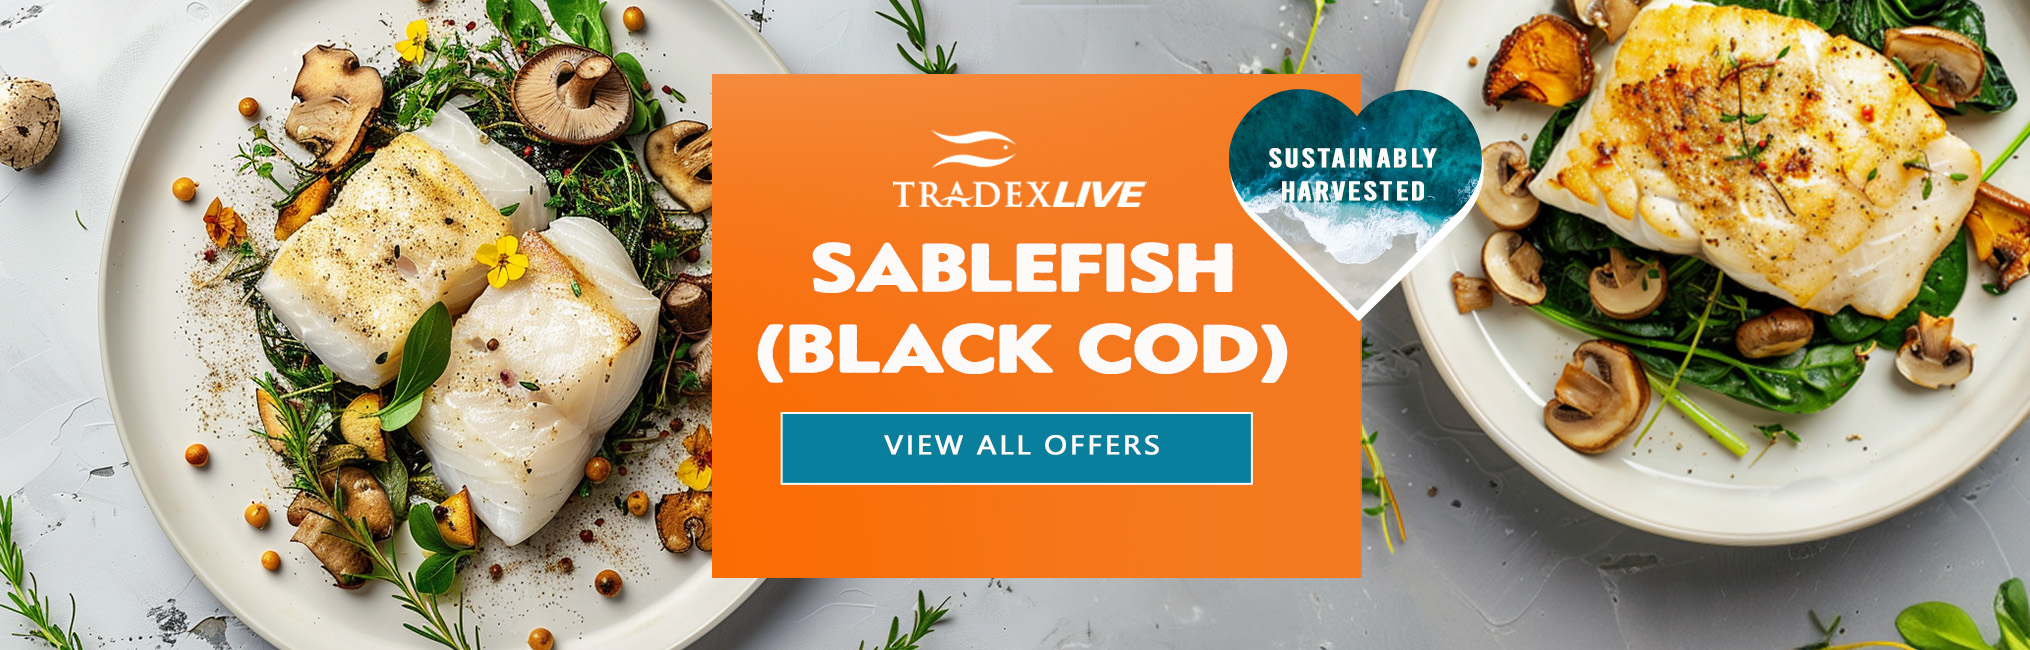 VIEW ALL BLACK COD OFFERS ON TRADEXLIVE